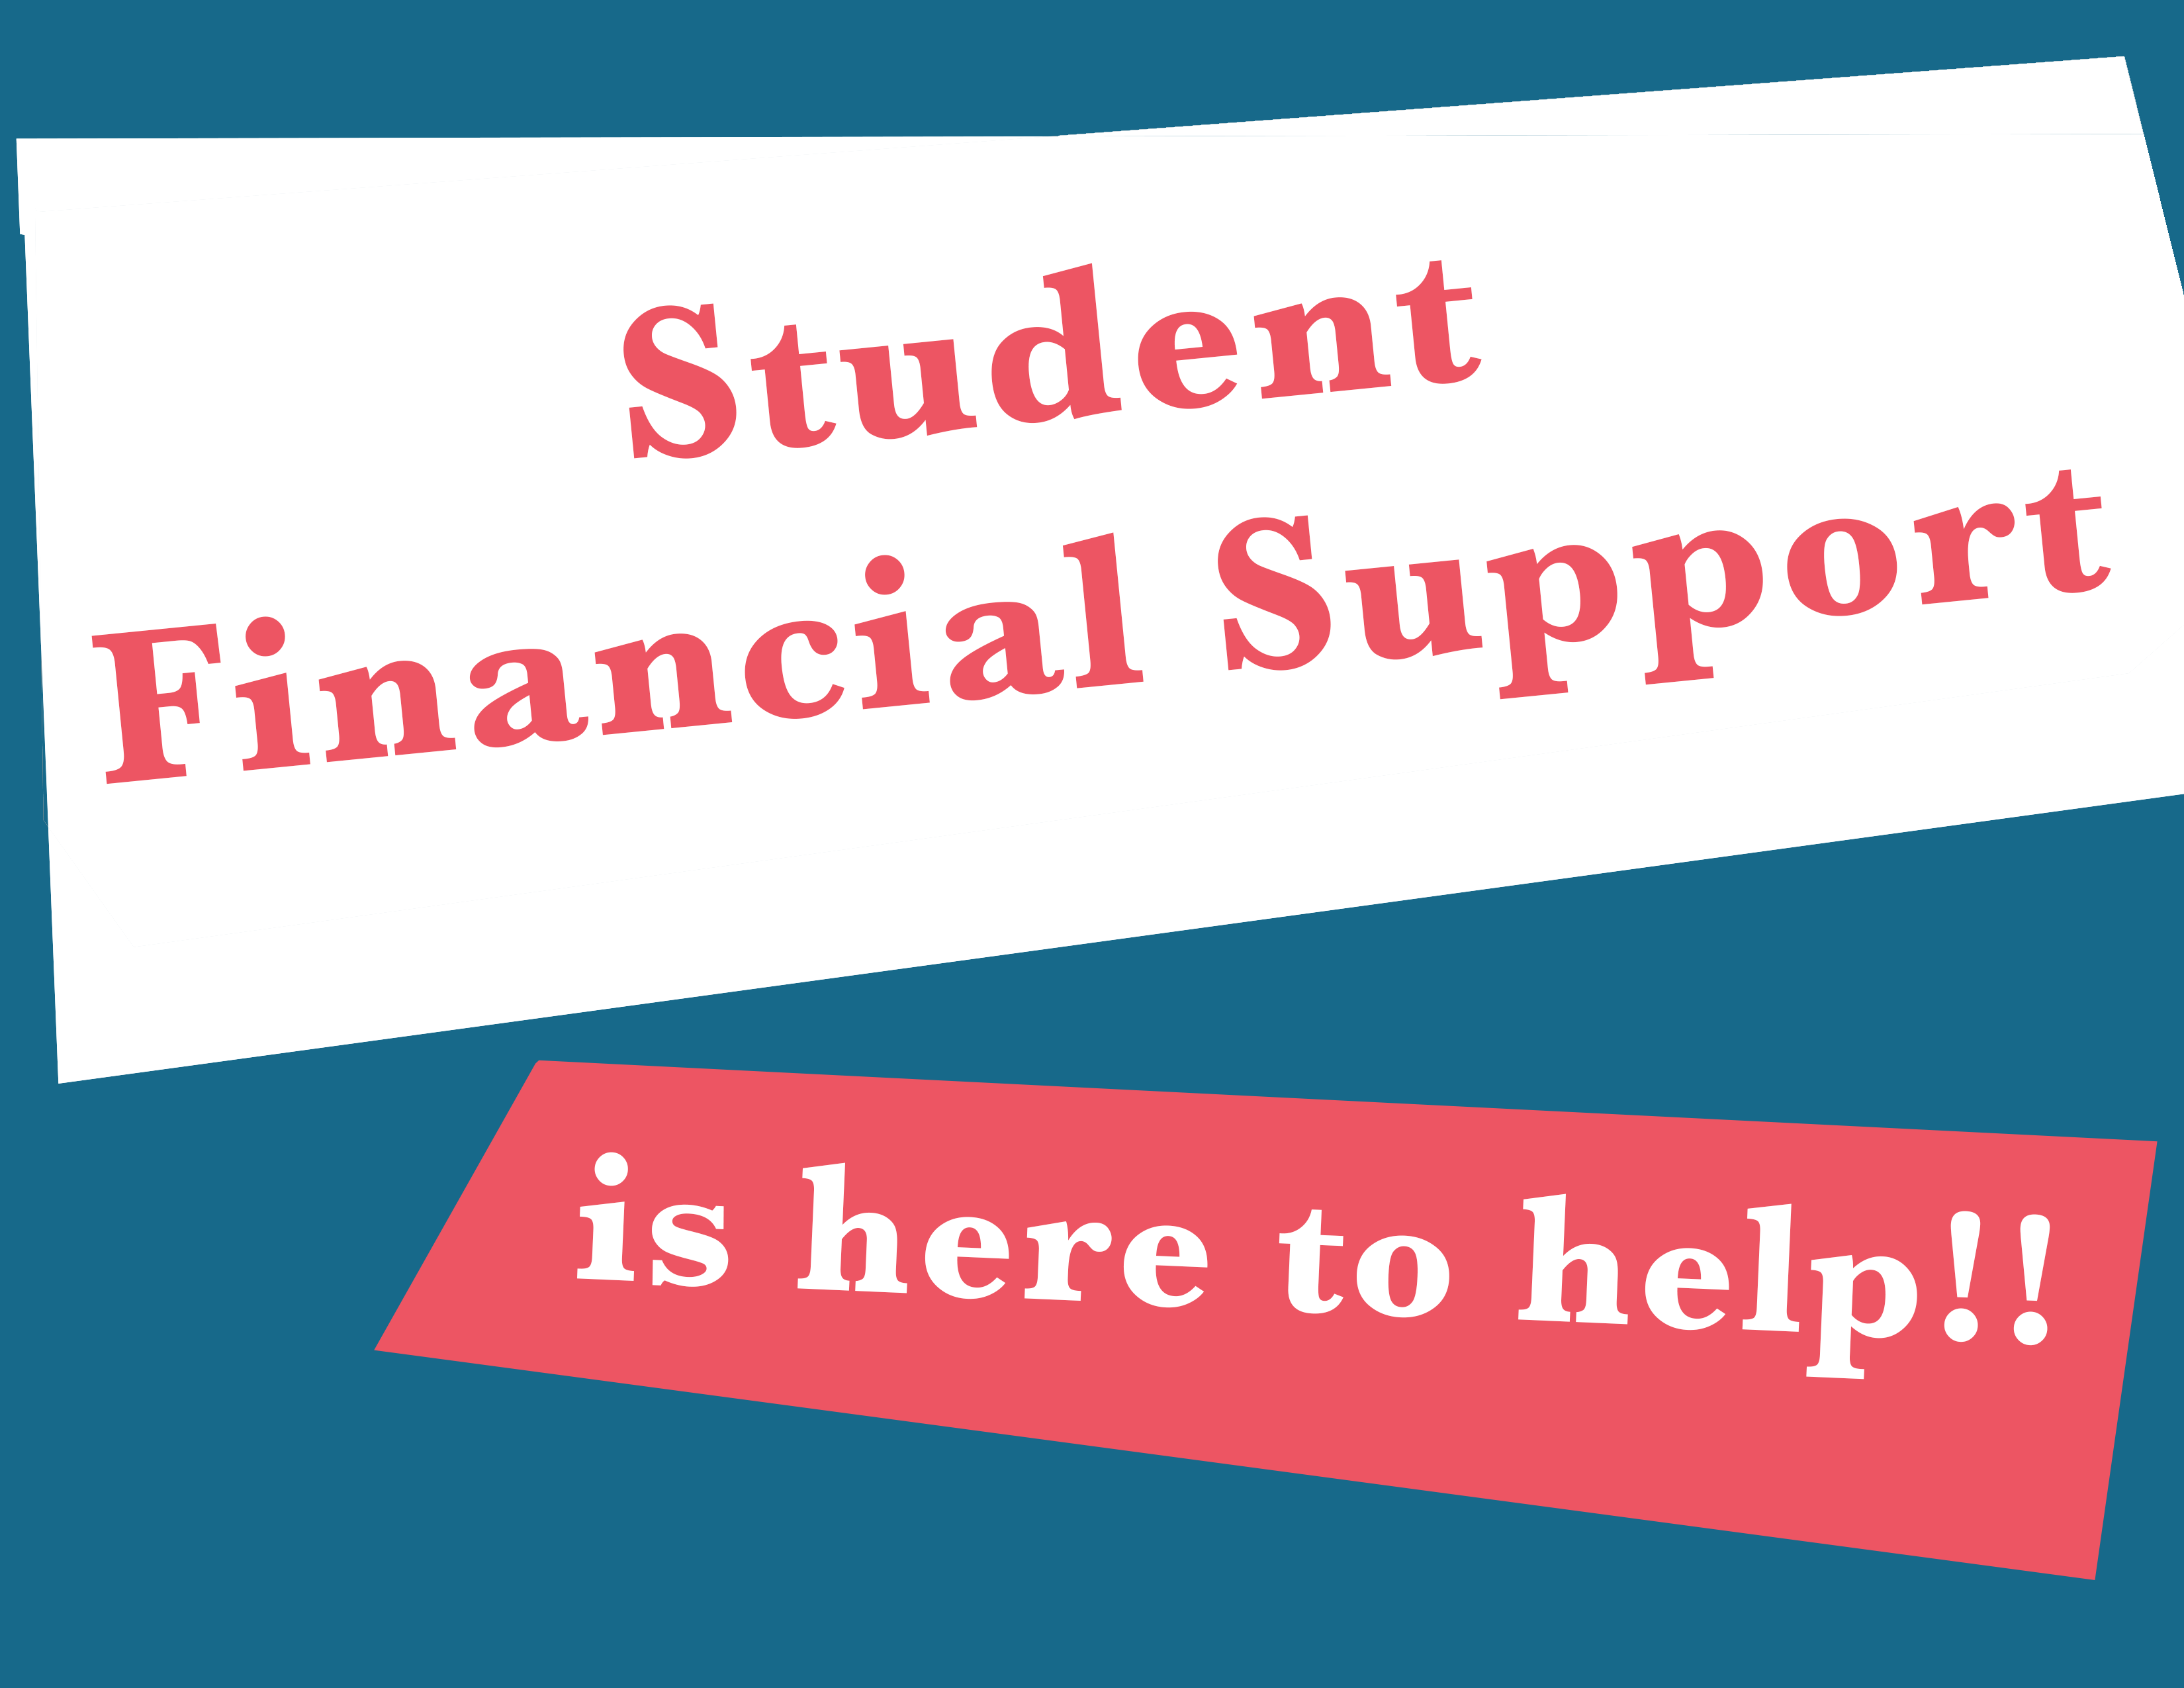 Student Financial Support is Here to Help!